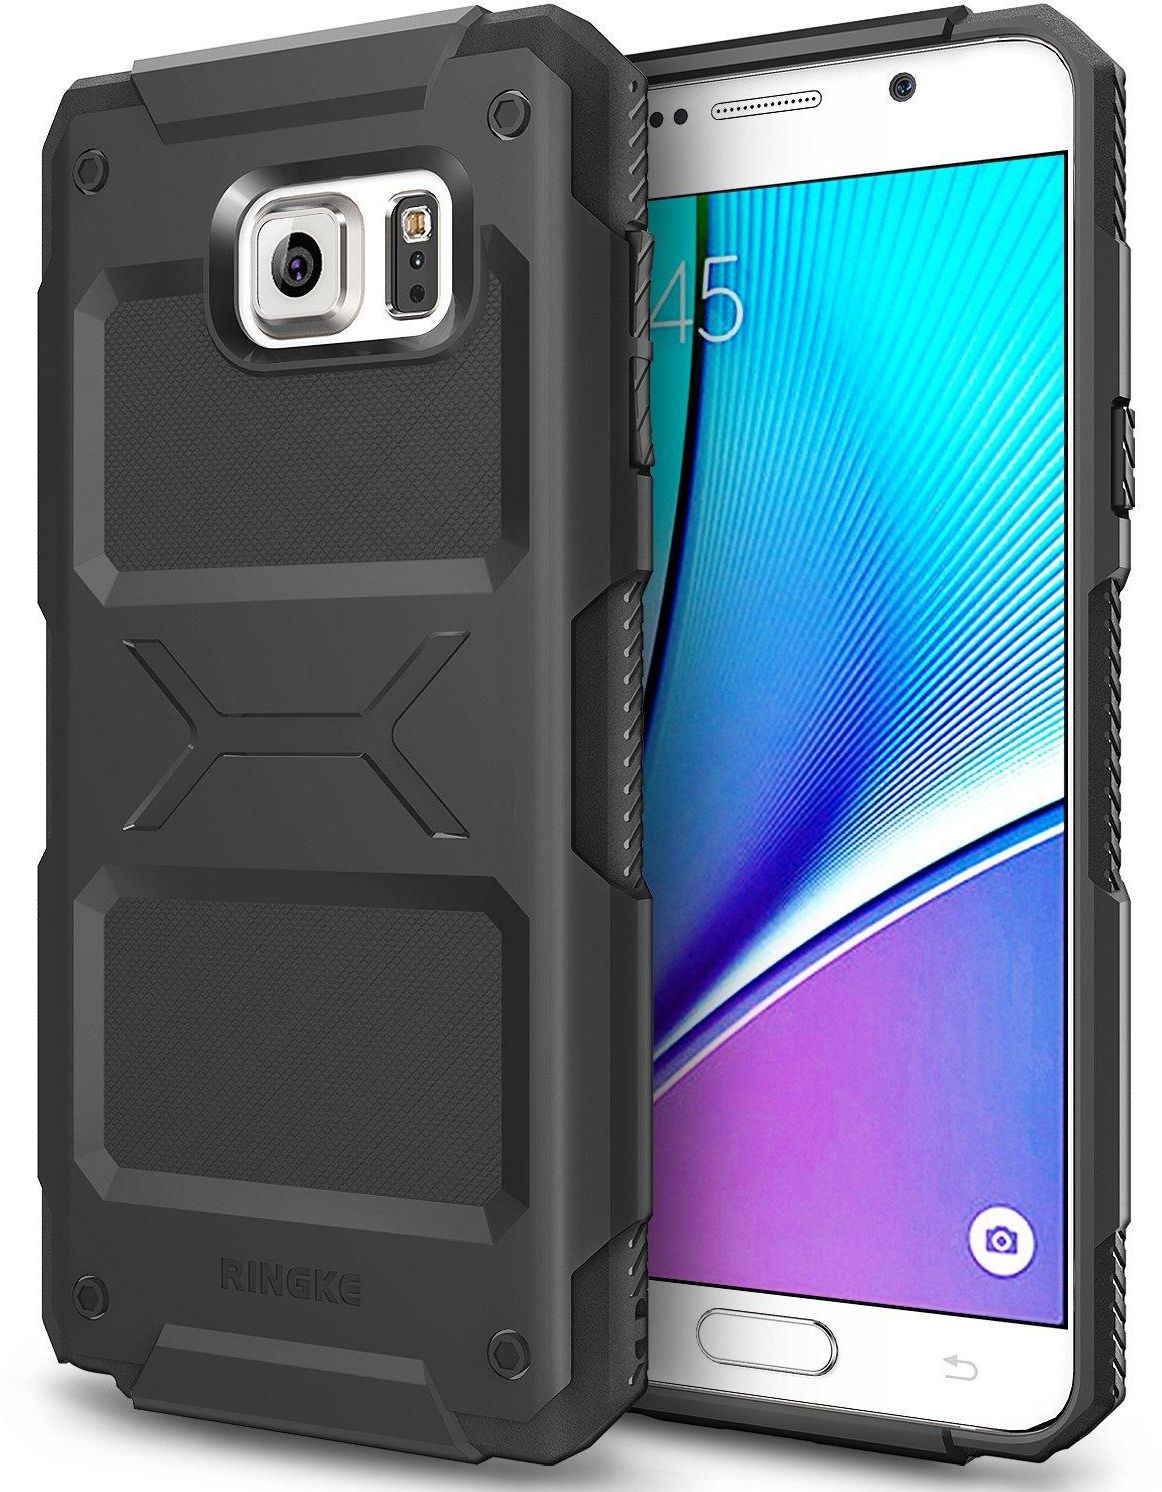 Rearth Ringke REBEL Resilient Strength Defensive Case for Samsung Galaxy Note 5 - Black